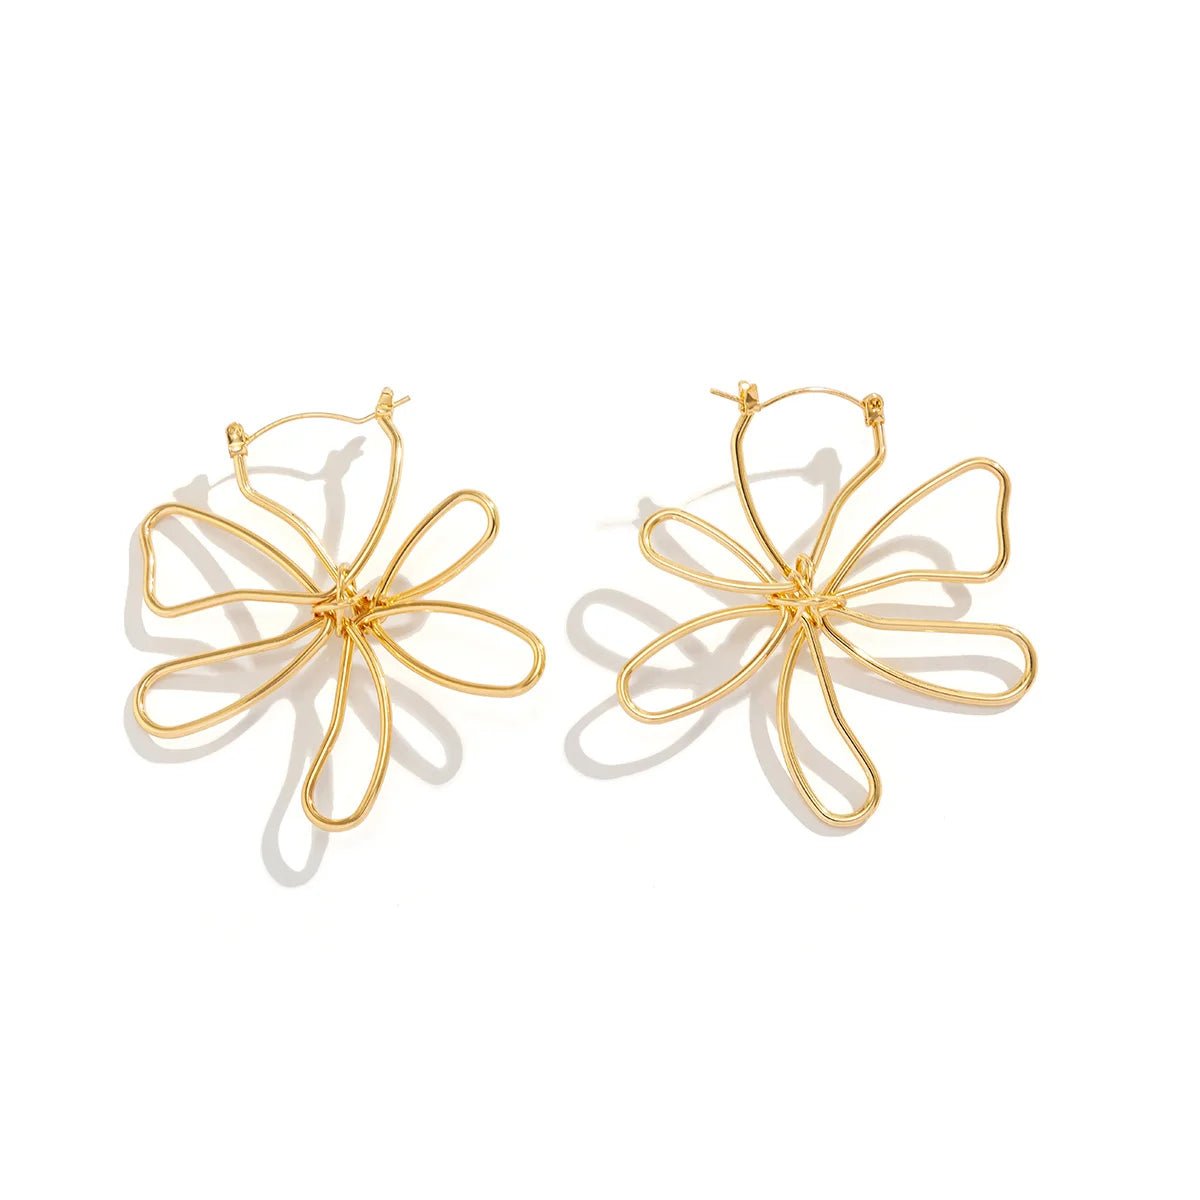 Floral Knot Outline Earrings - Veinci